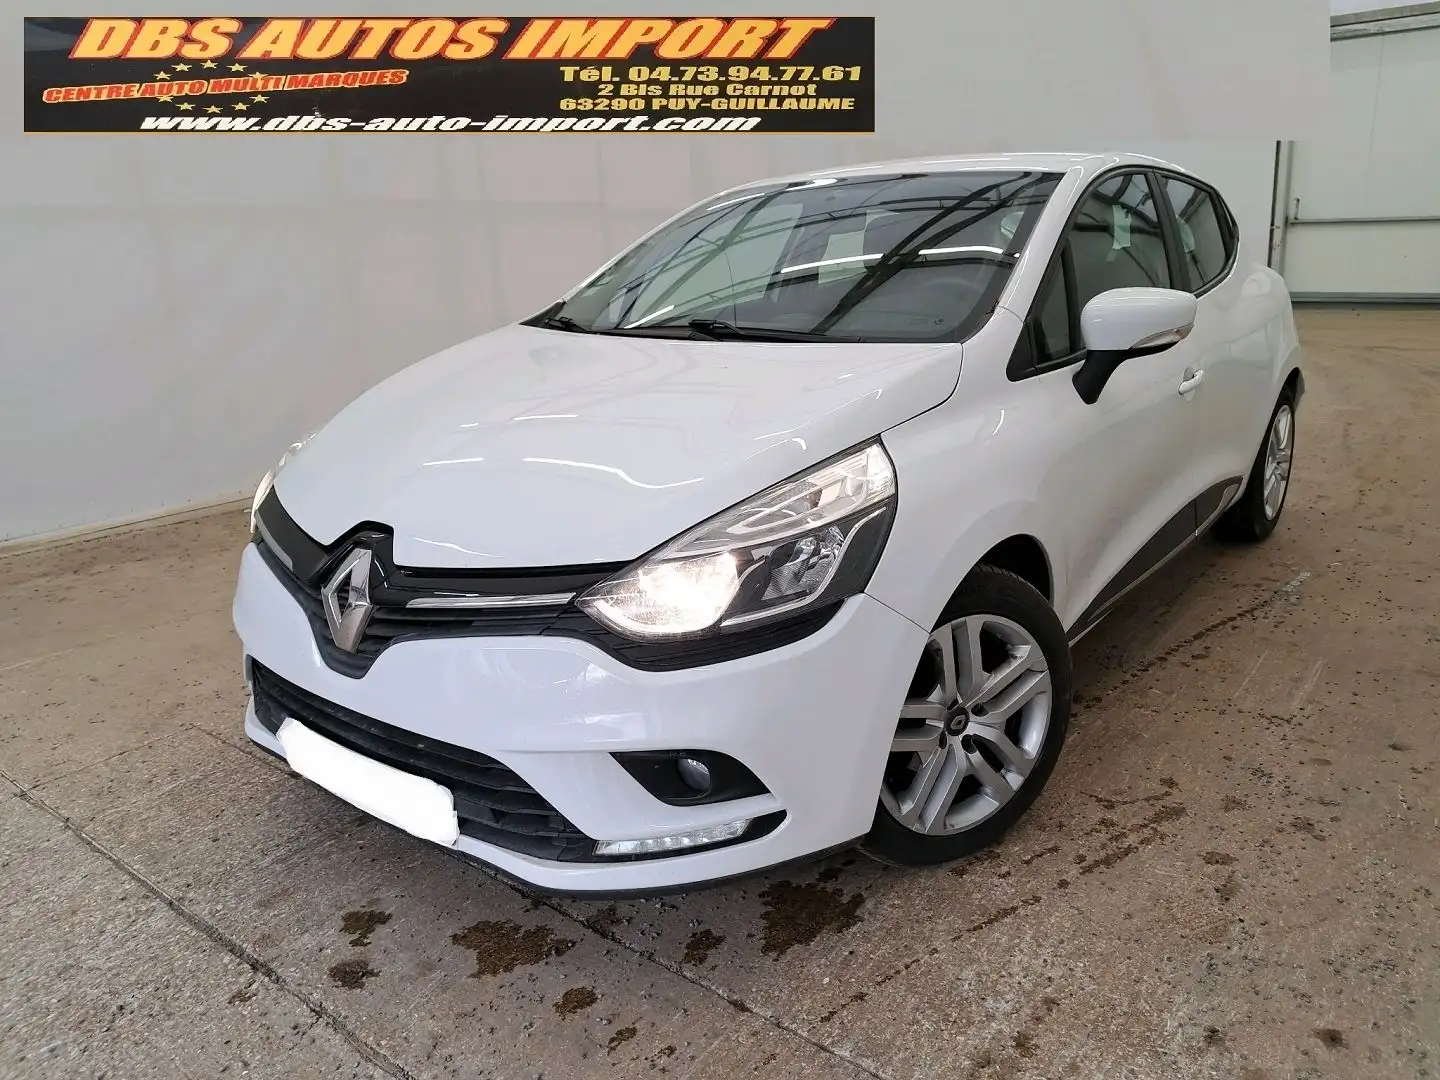 Renault Clio 1.5 DCI 90CH ENERGY BUSINESS 82G 5P - 1